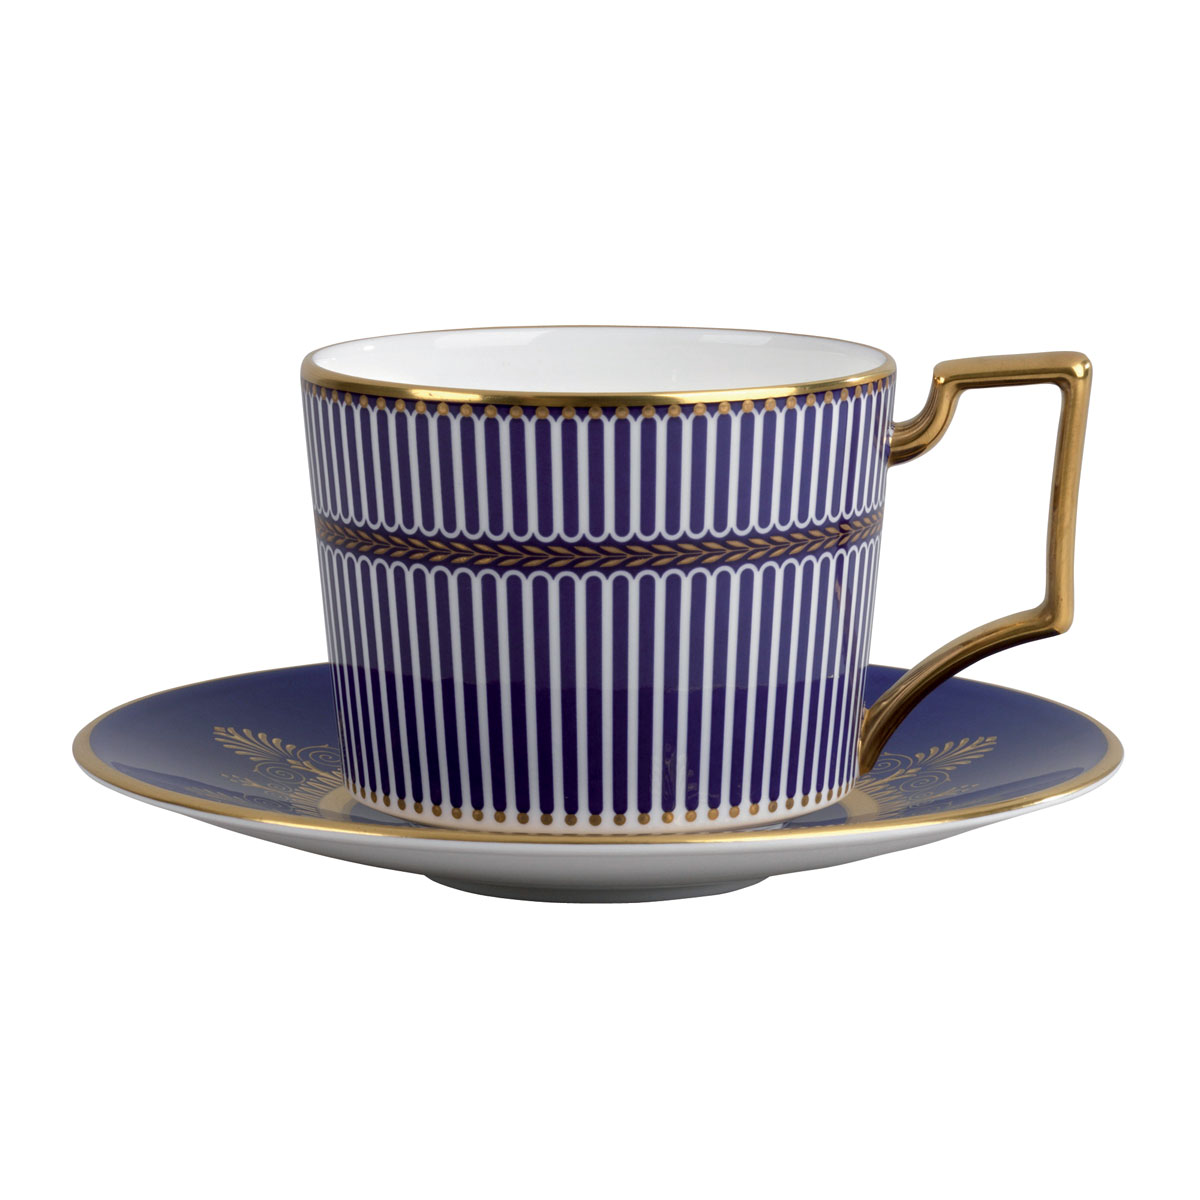 Wedgwood Anthemion Blue Teacup and Saucer